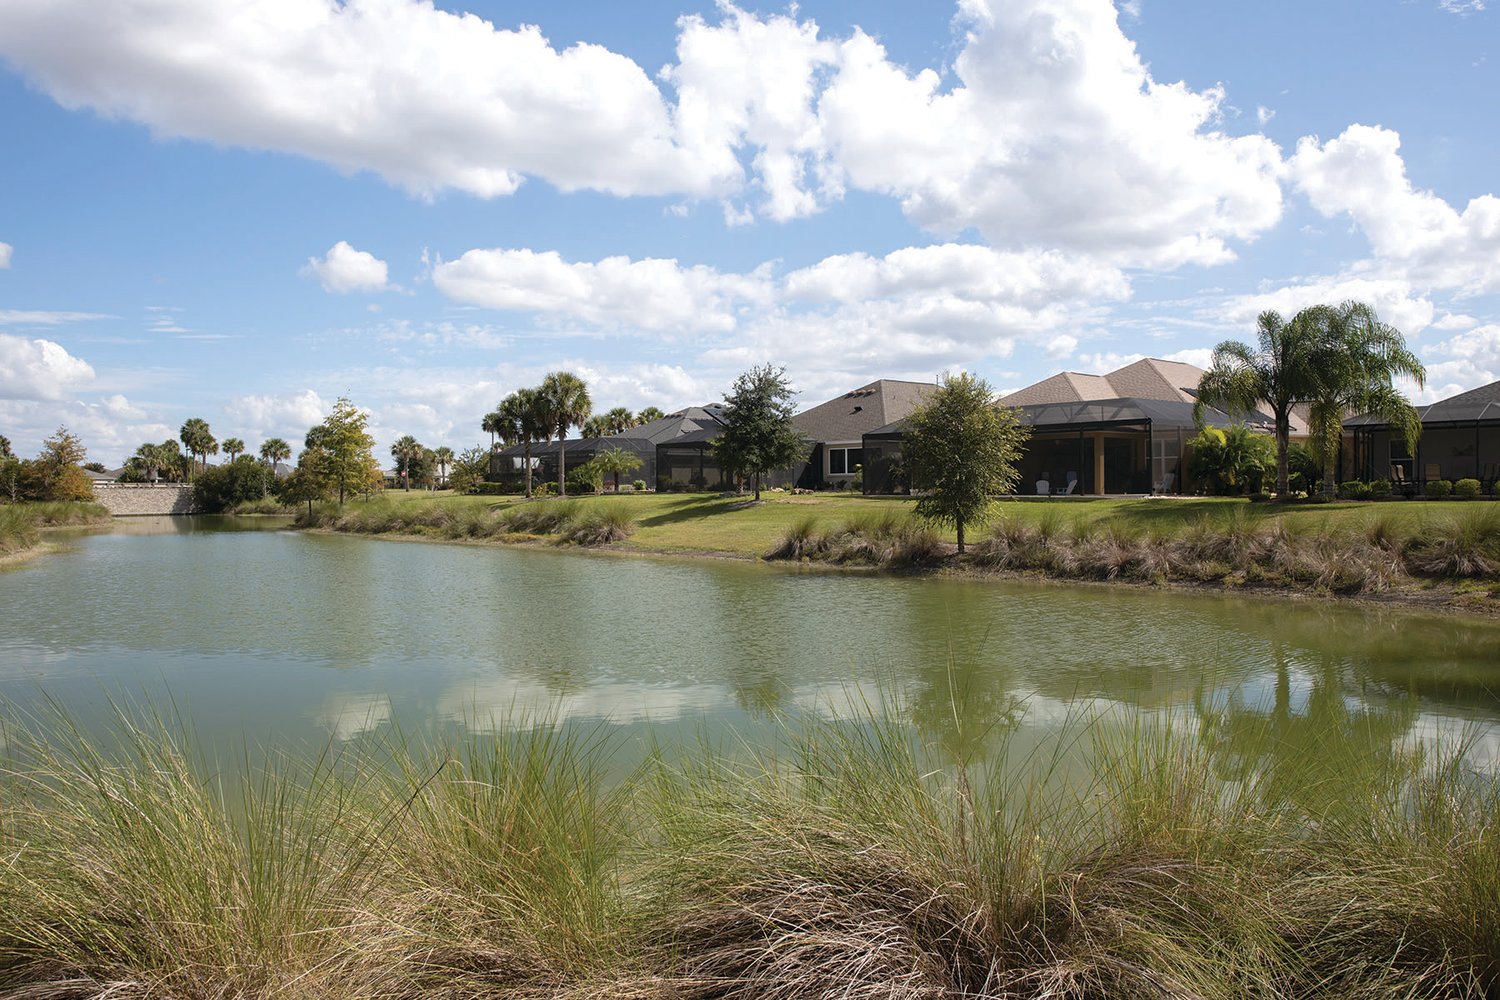 Rentention pond in a neighborhood in the Villages located in Florida.